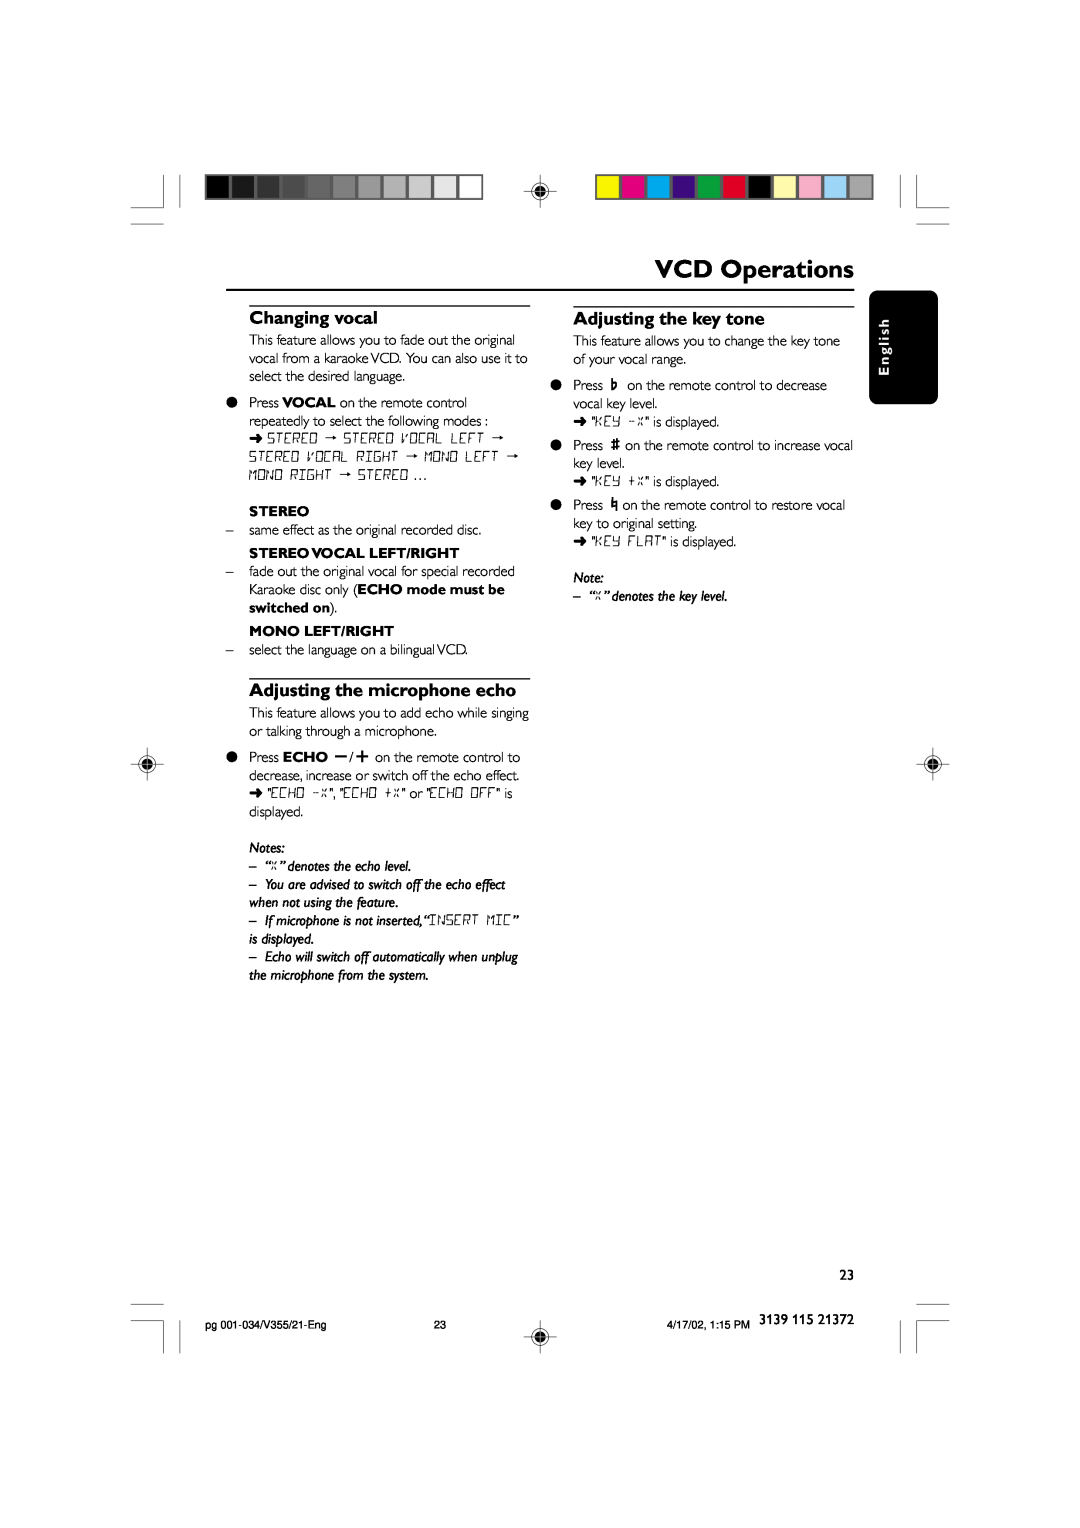 Philips FW-V355 manual VCD Operations, Stereo Vocal Left/Right, Mono Left/Right, E n g l i s h 